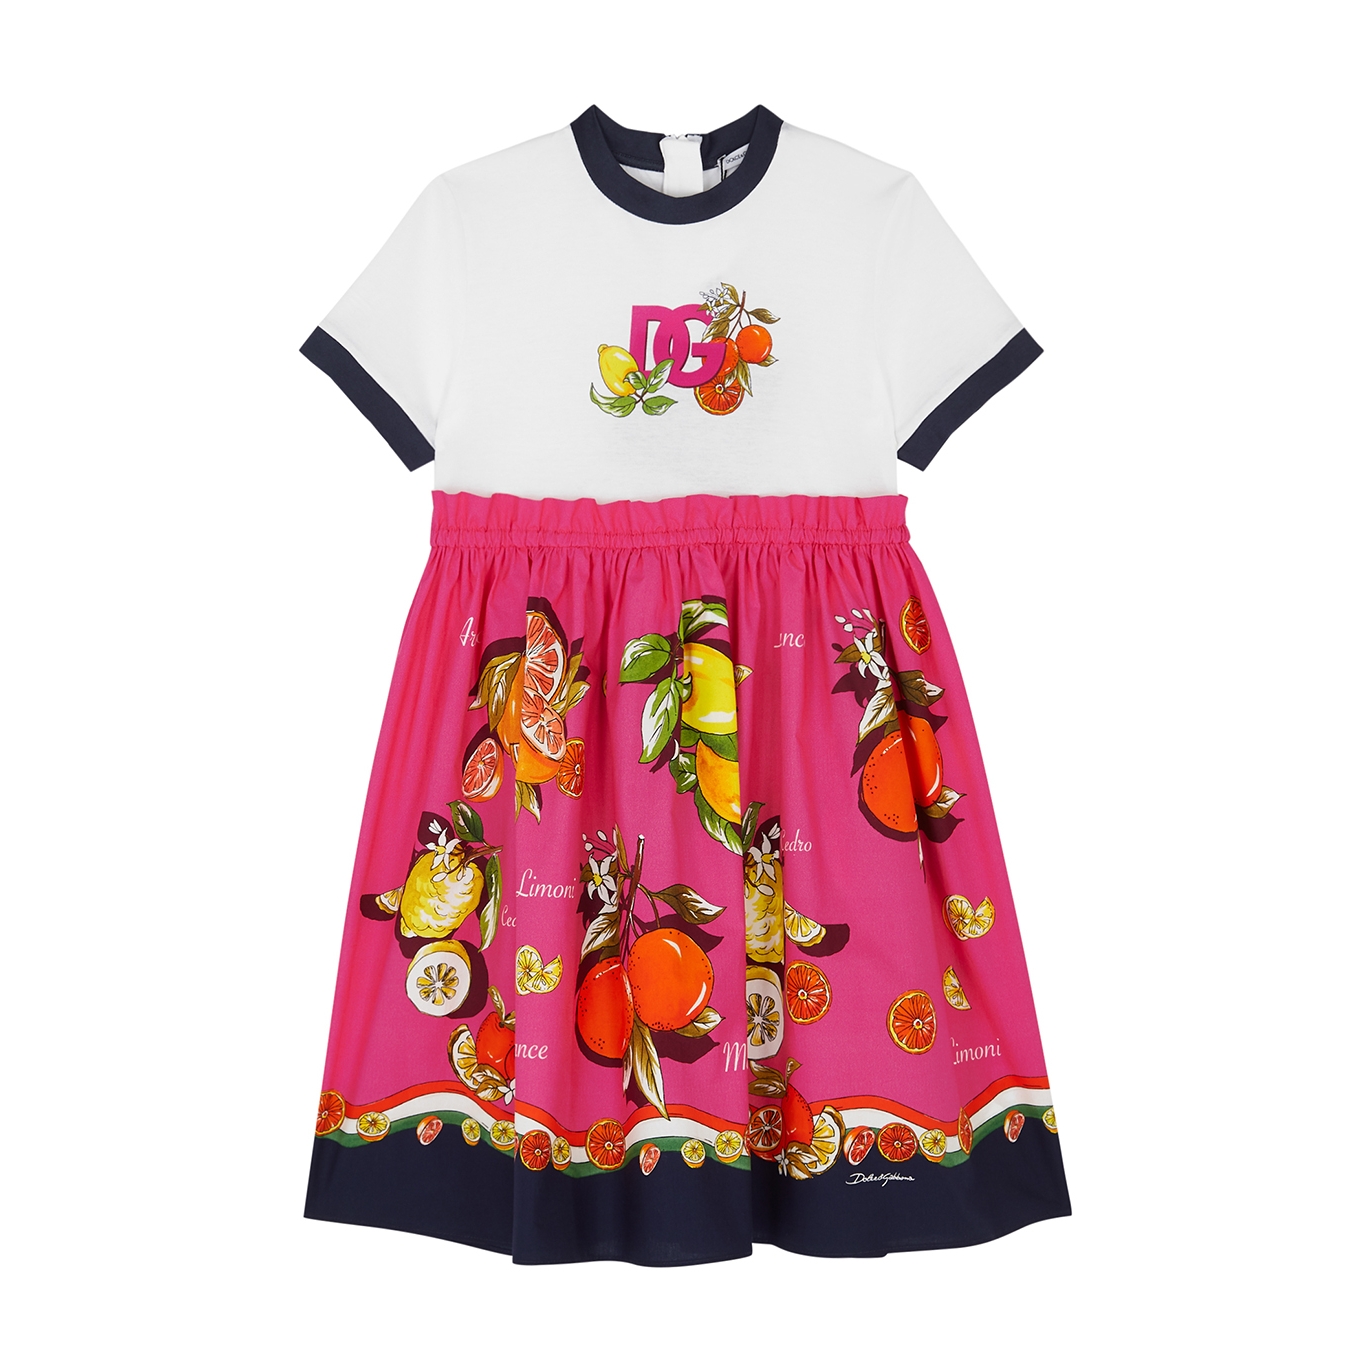 Dolce & Gabbana Kids Panelled Printed Cotton Dress (2-6 Years) - Multicoloured - 4 Years